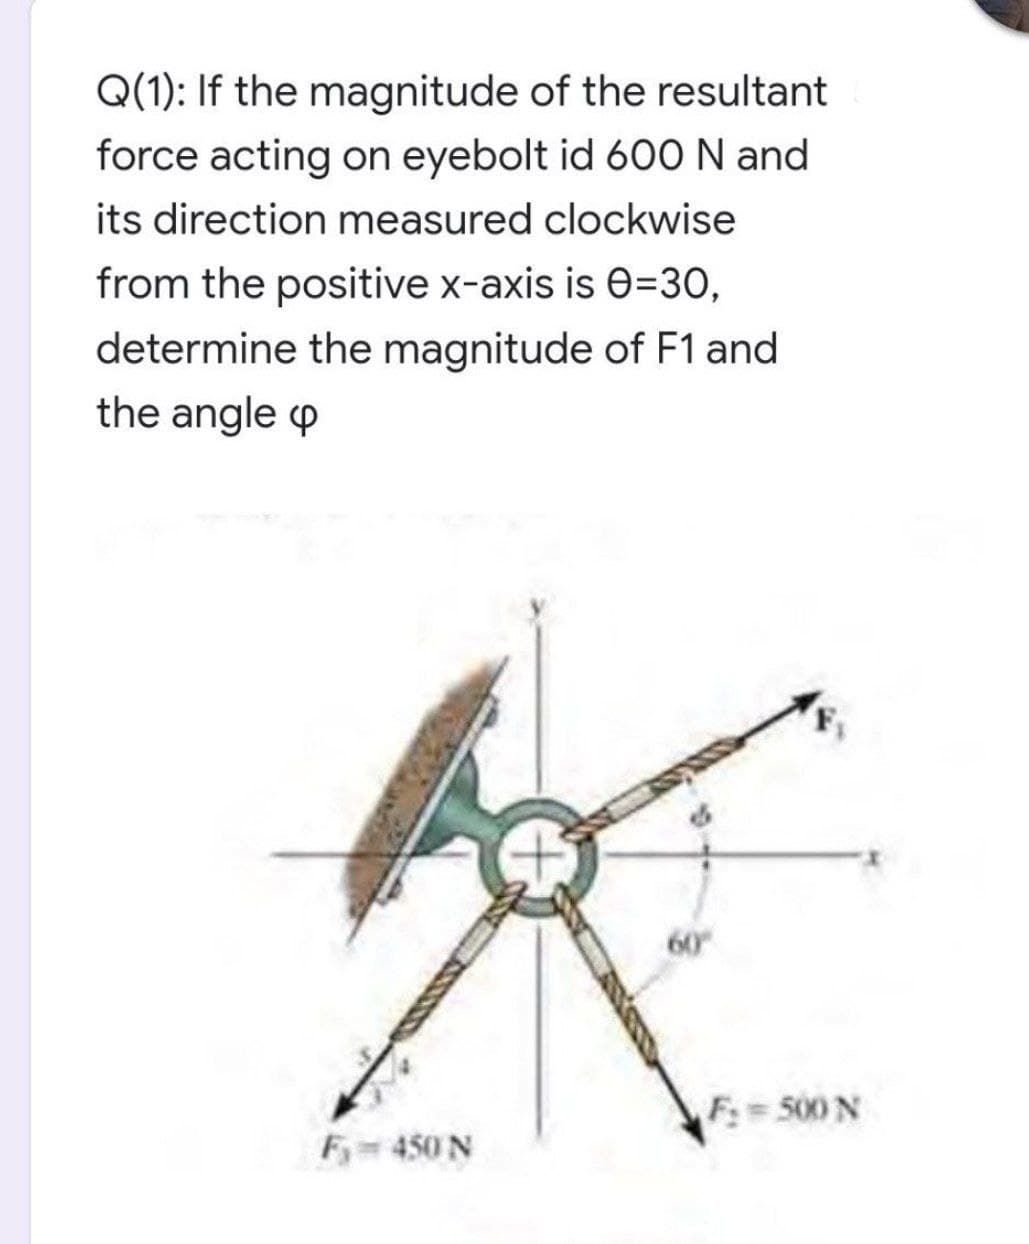 Q(1): If the magnitude of the resultant
force acting on eyebolt id 60O N and
its direction measured clockwise
from the positive x-axis is e=30,
determine the magnitude of F1 and
the angle p
F:=500 N
Fy 450 N
